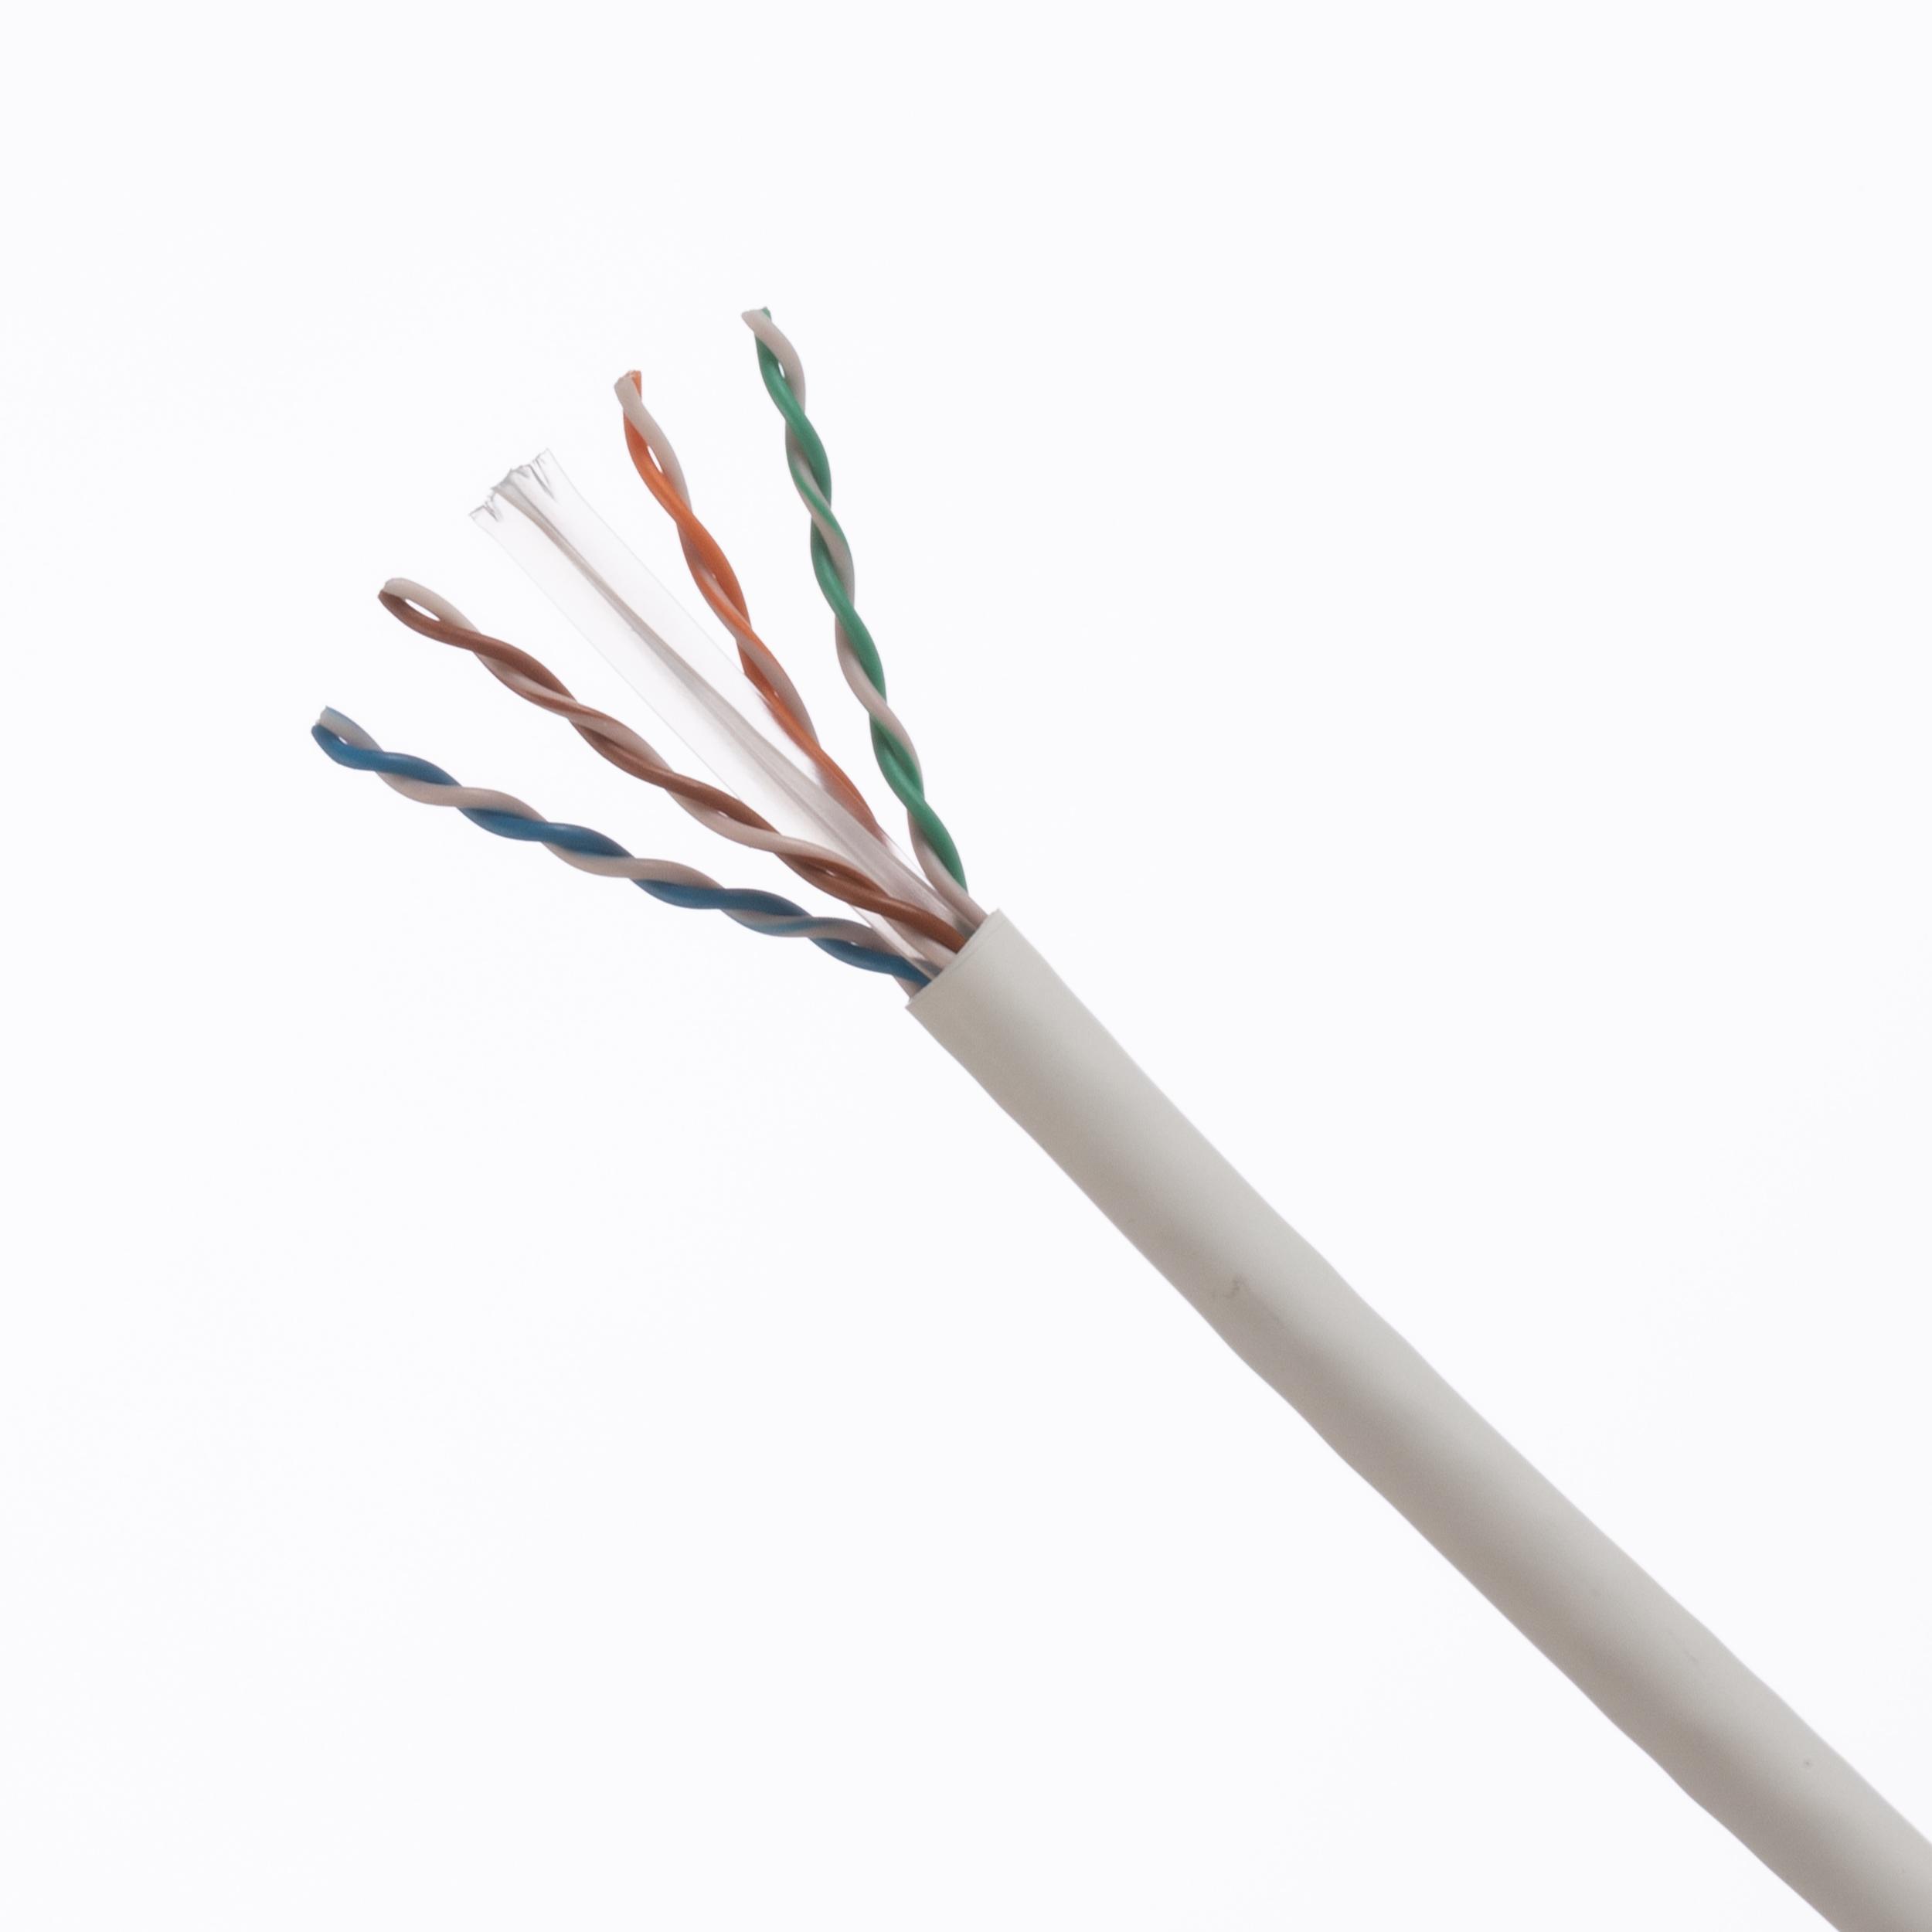 Panduit PUY6004IG-HE TX6000™ Copper Cable, Cat 6, 23 AWG, U/UTP, International Gray